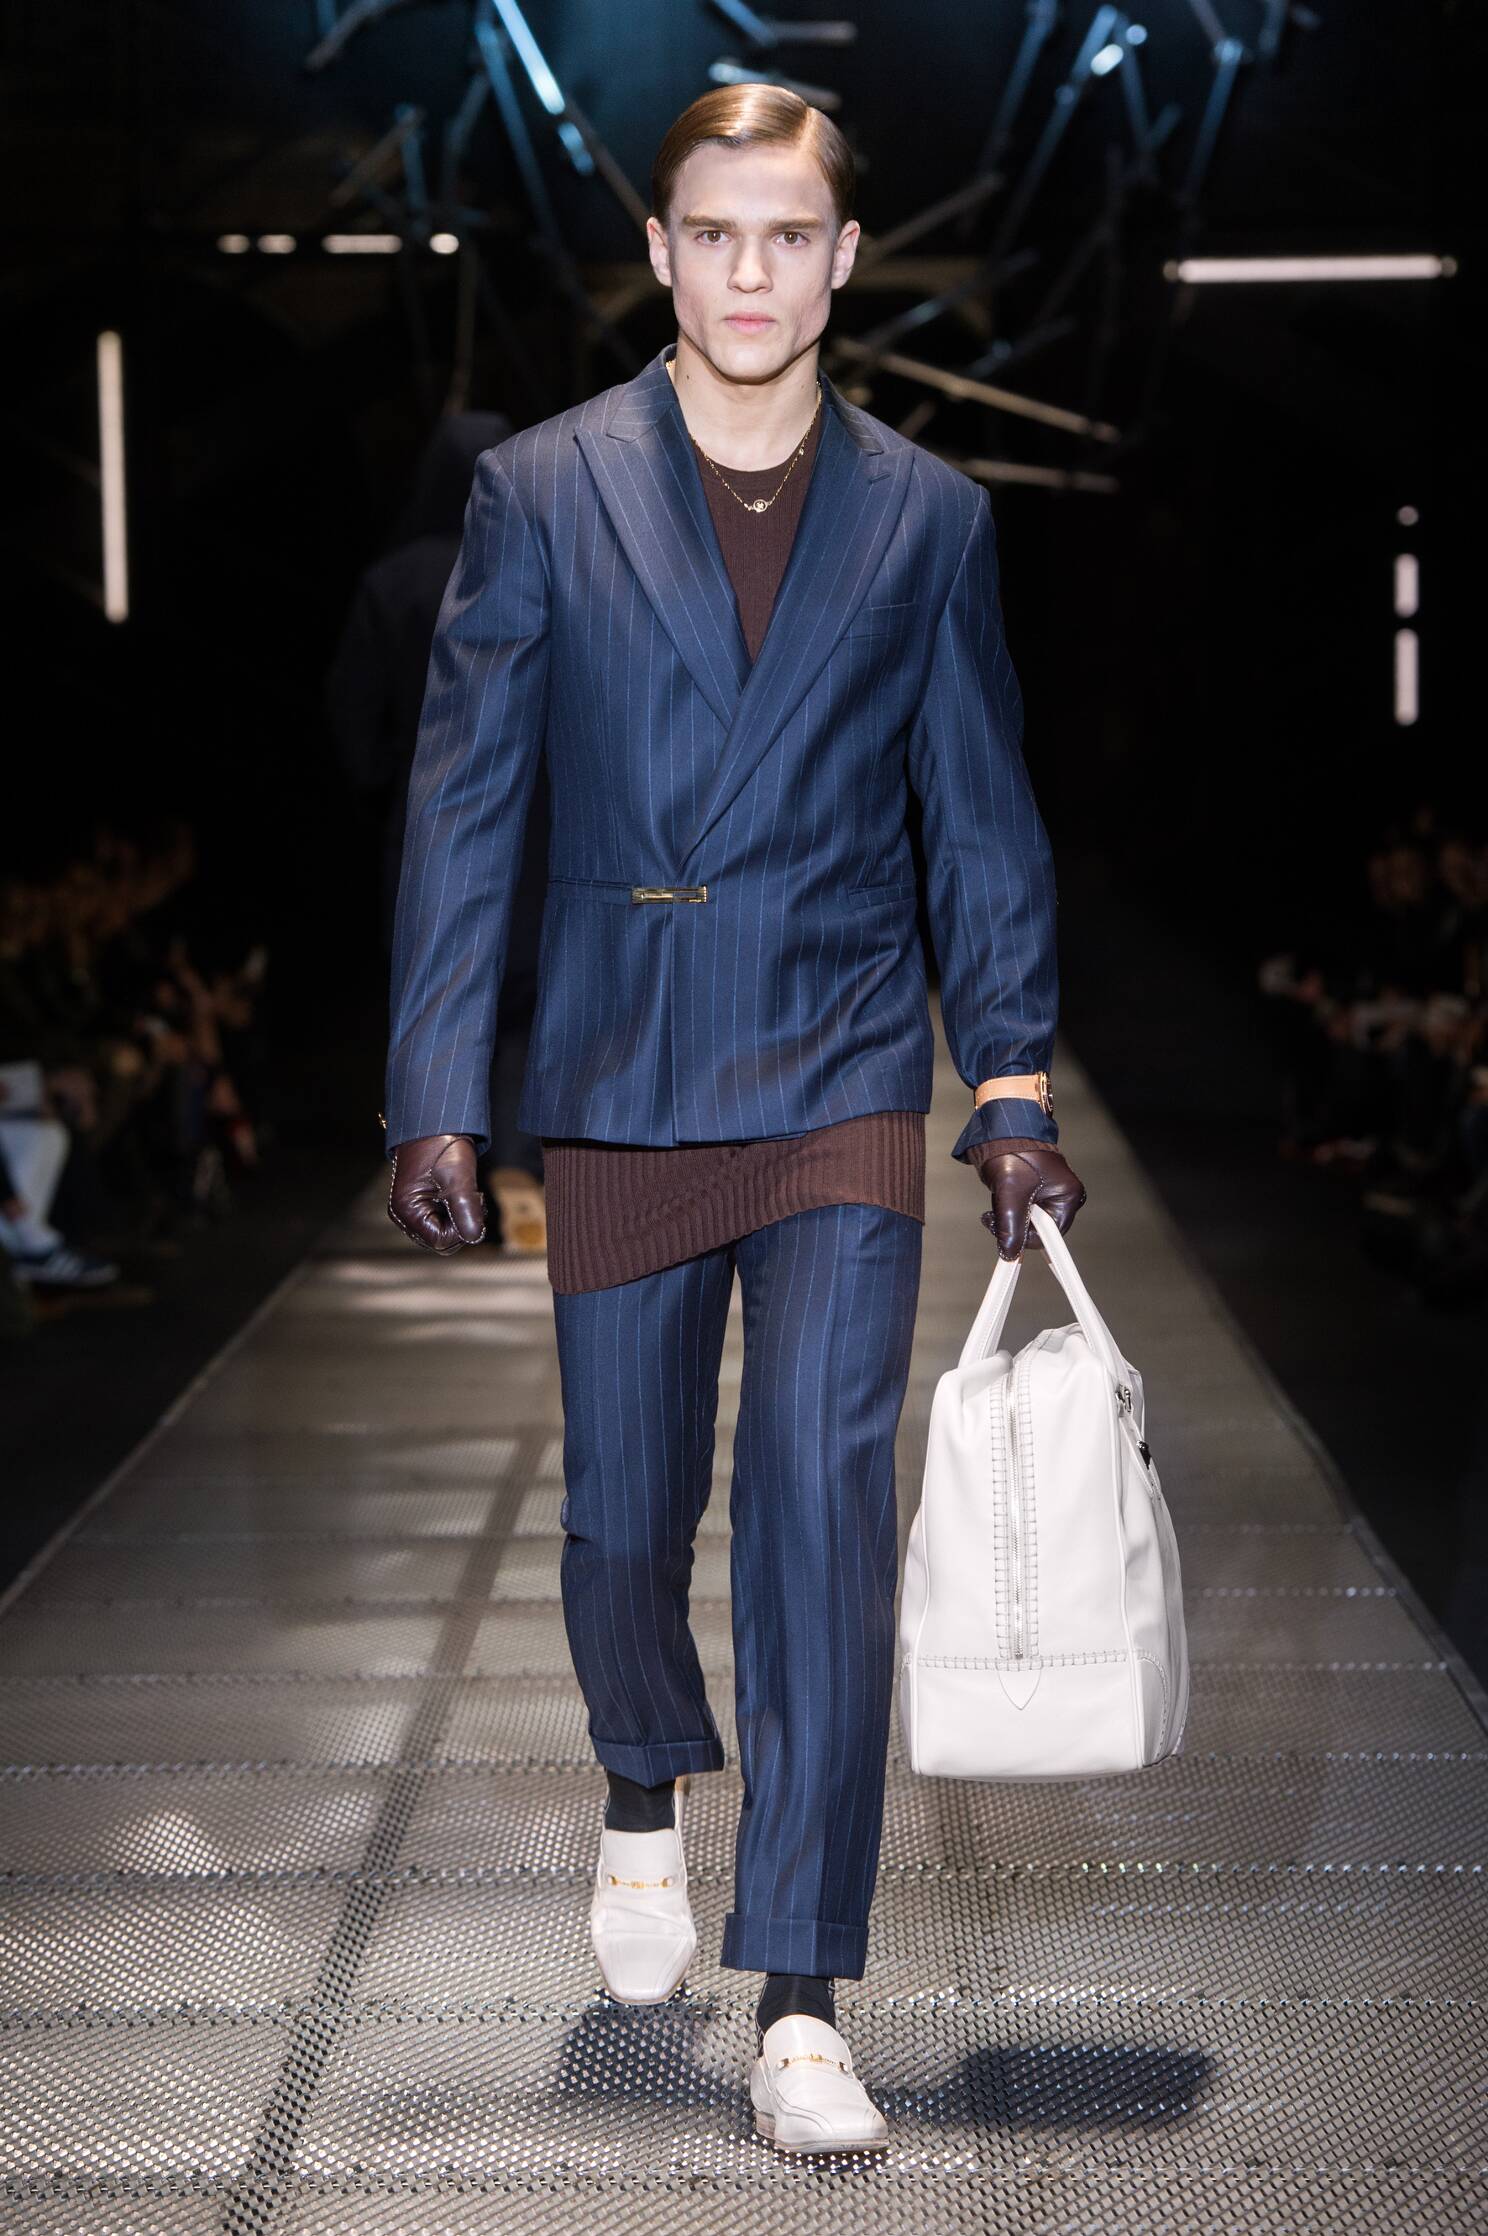 VERSACE FALL WINTER 2015 MEN'S COLLECTION | The Skinny Beep